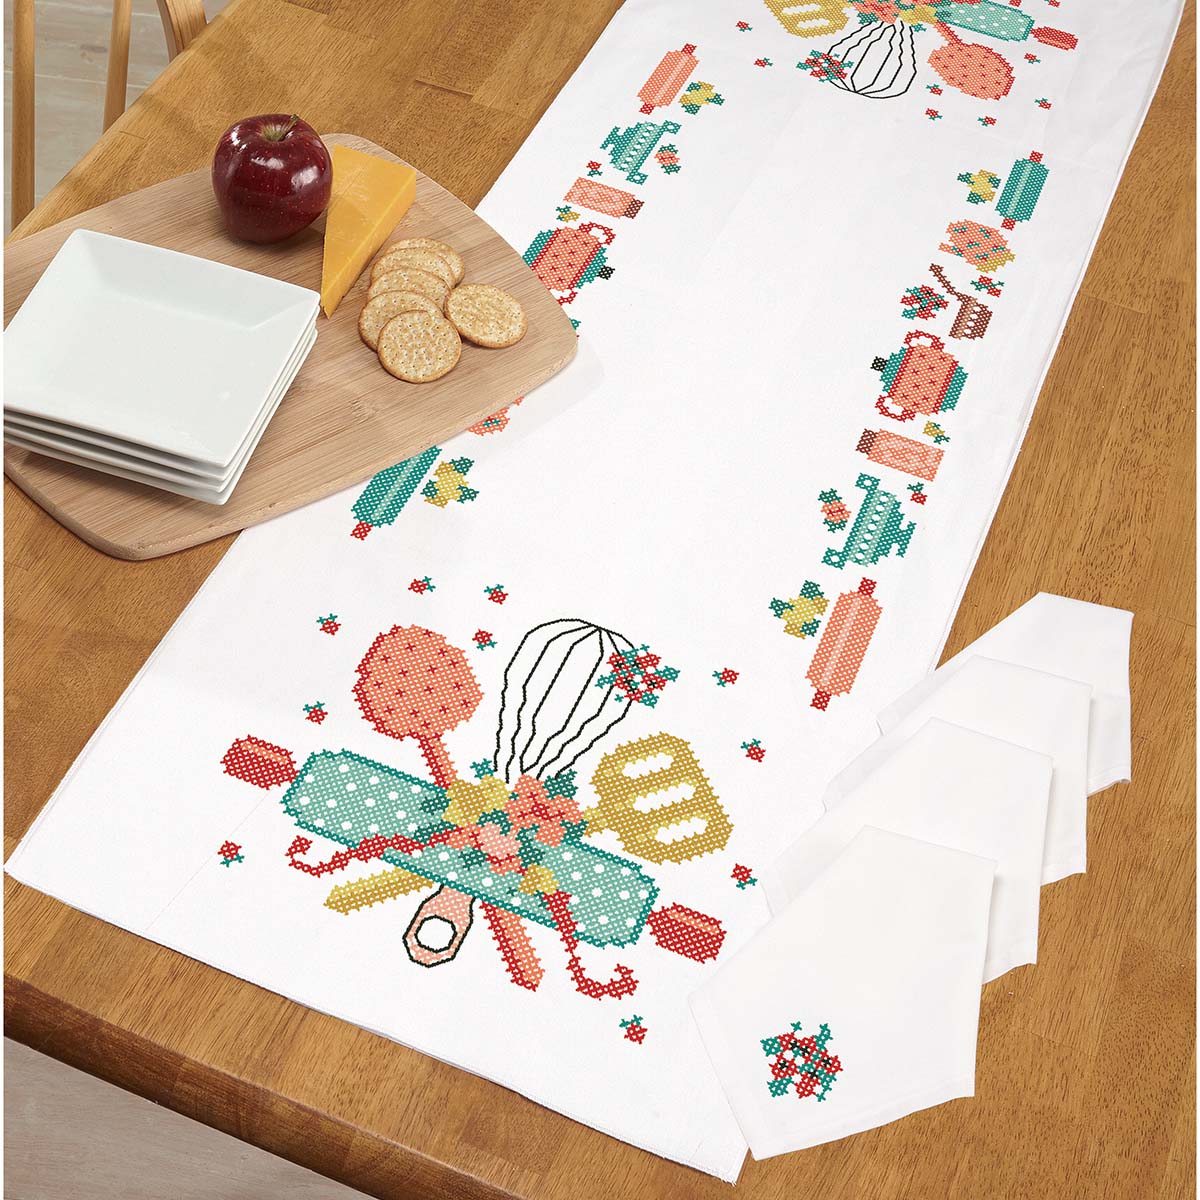 Paper Table Runner - The Chic Site